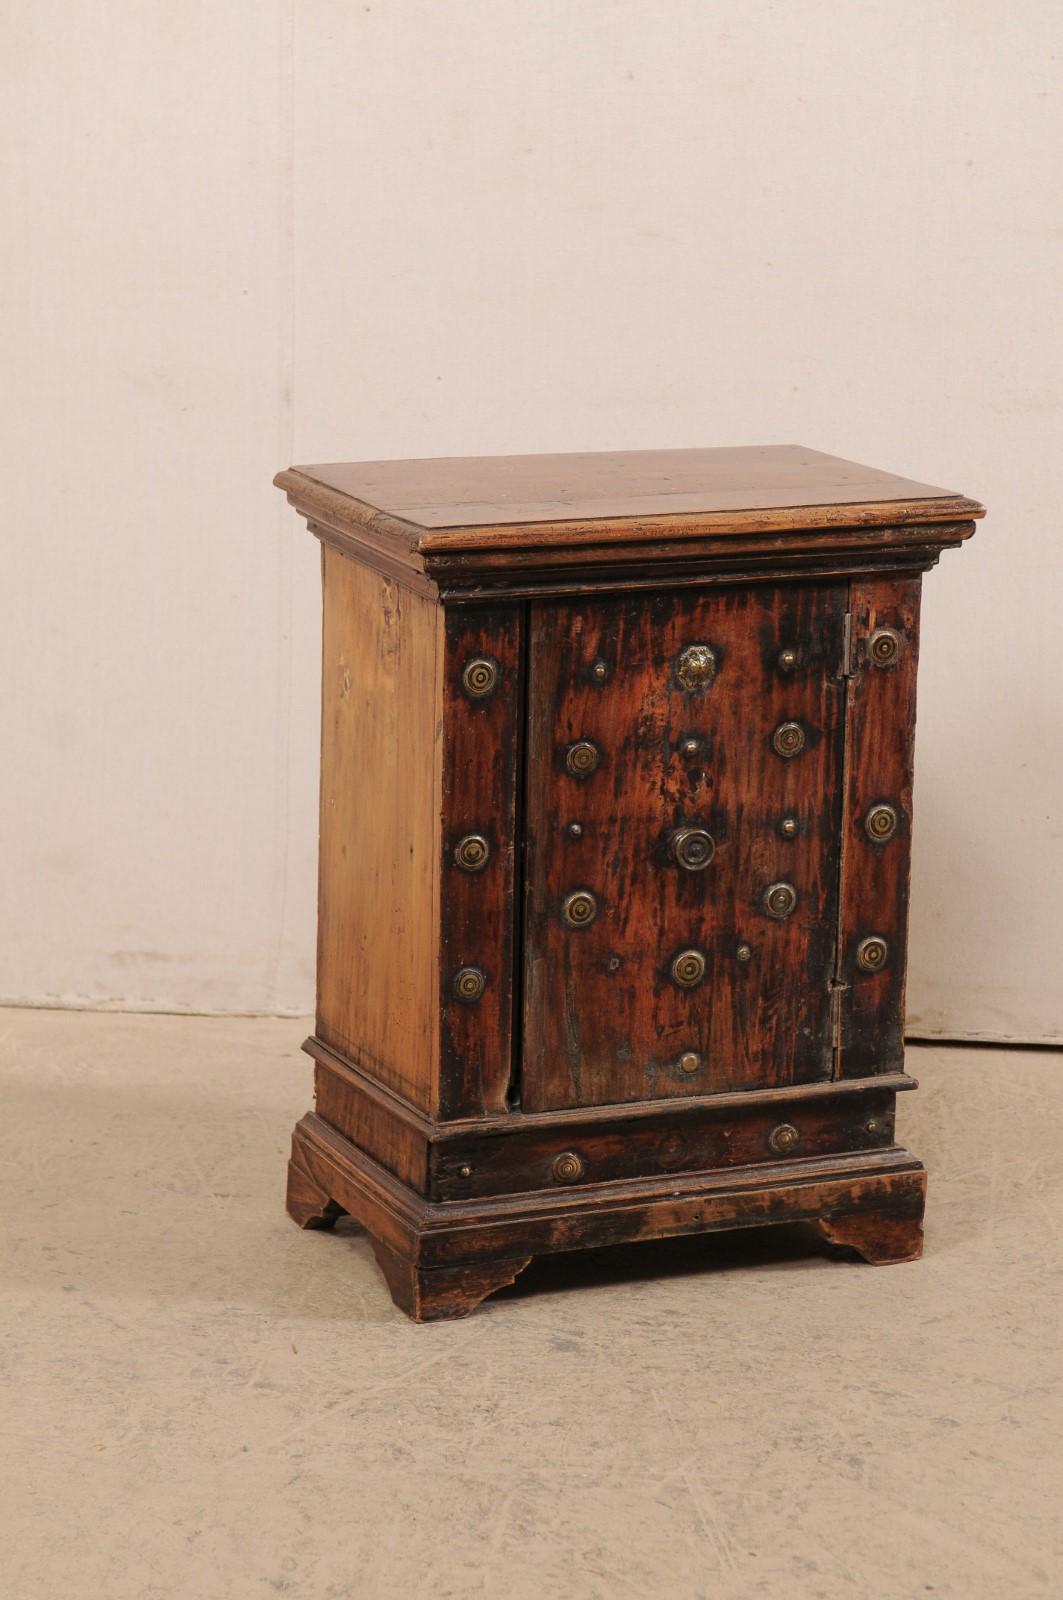 An Italian small-sized wooden cabinet with brass accents from the 18th century. This antique side cabinet from Italy is beautifully decorated in numerous brass medallions about it's front side. The rectangular-shaped top is stack-molded, resting